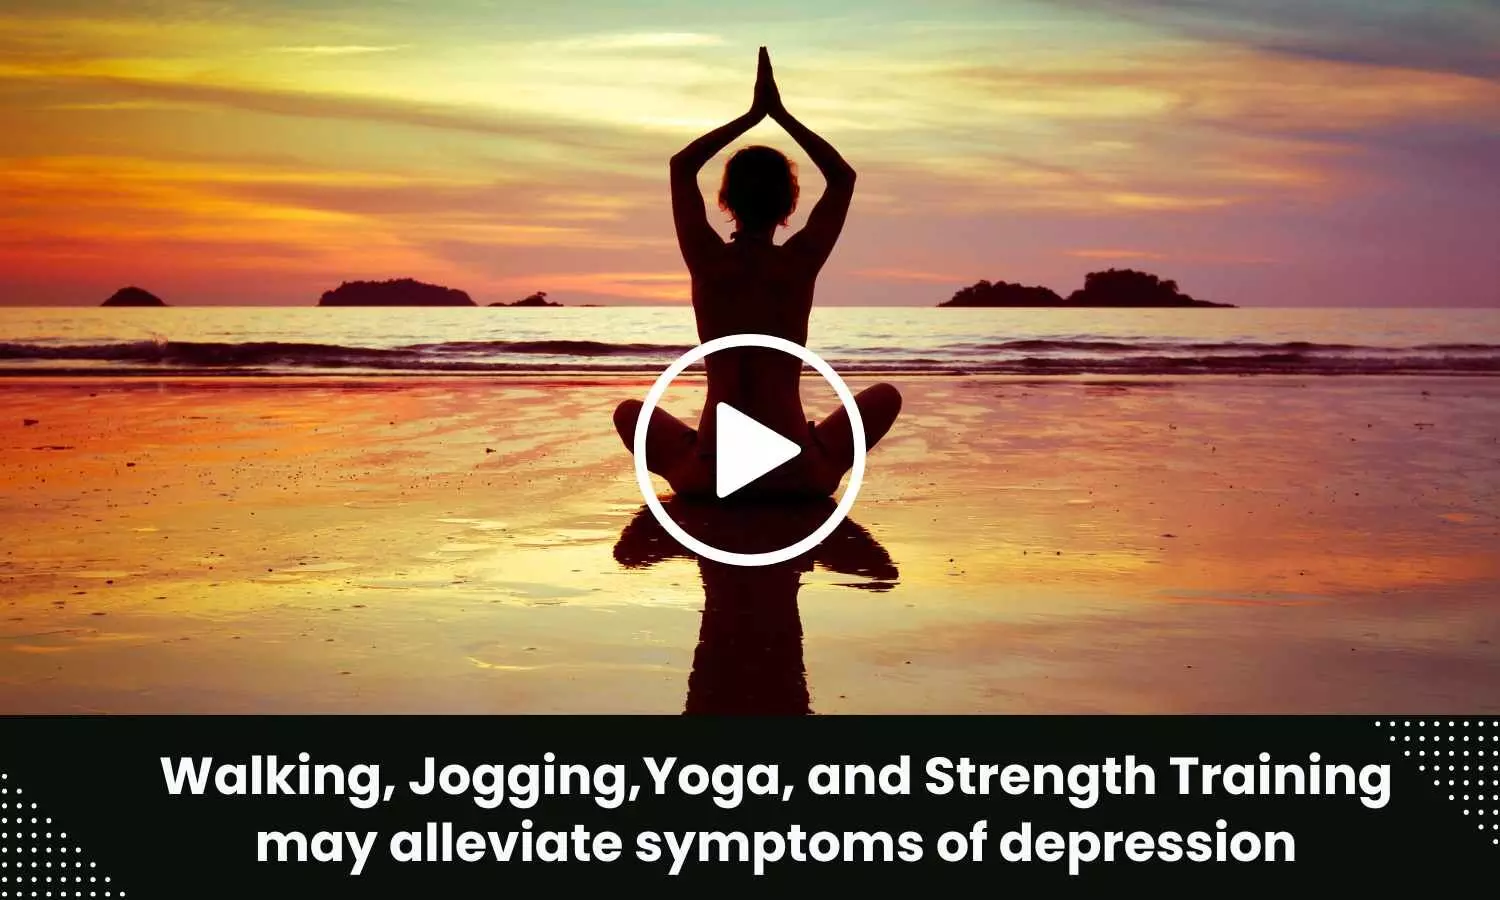 Walking, Jogging,Yoga, and Strength Training may alleviate symptoms of depression